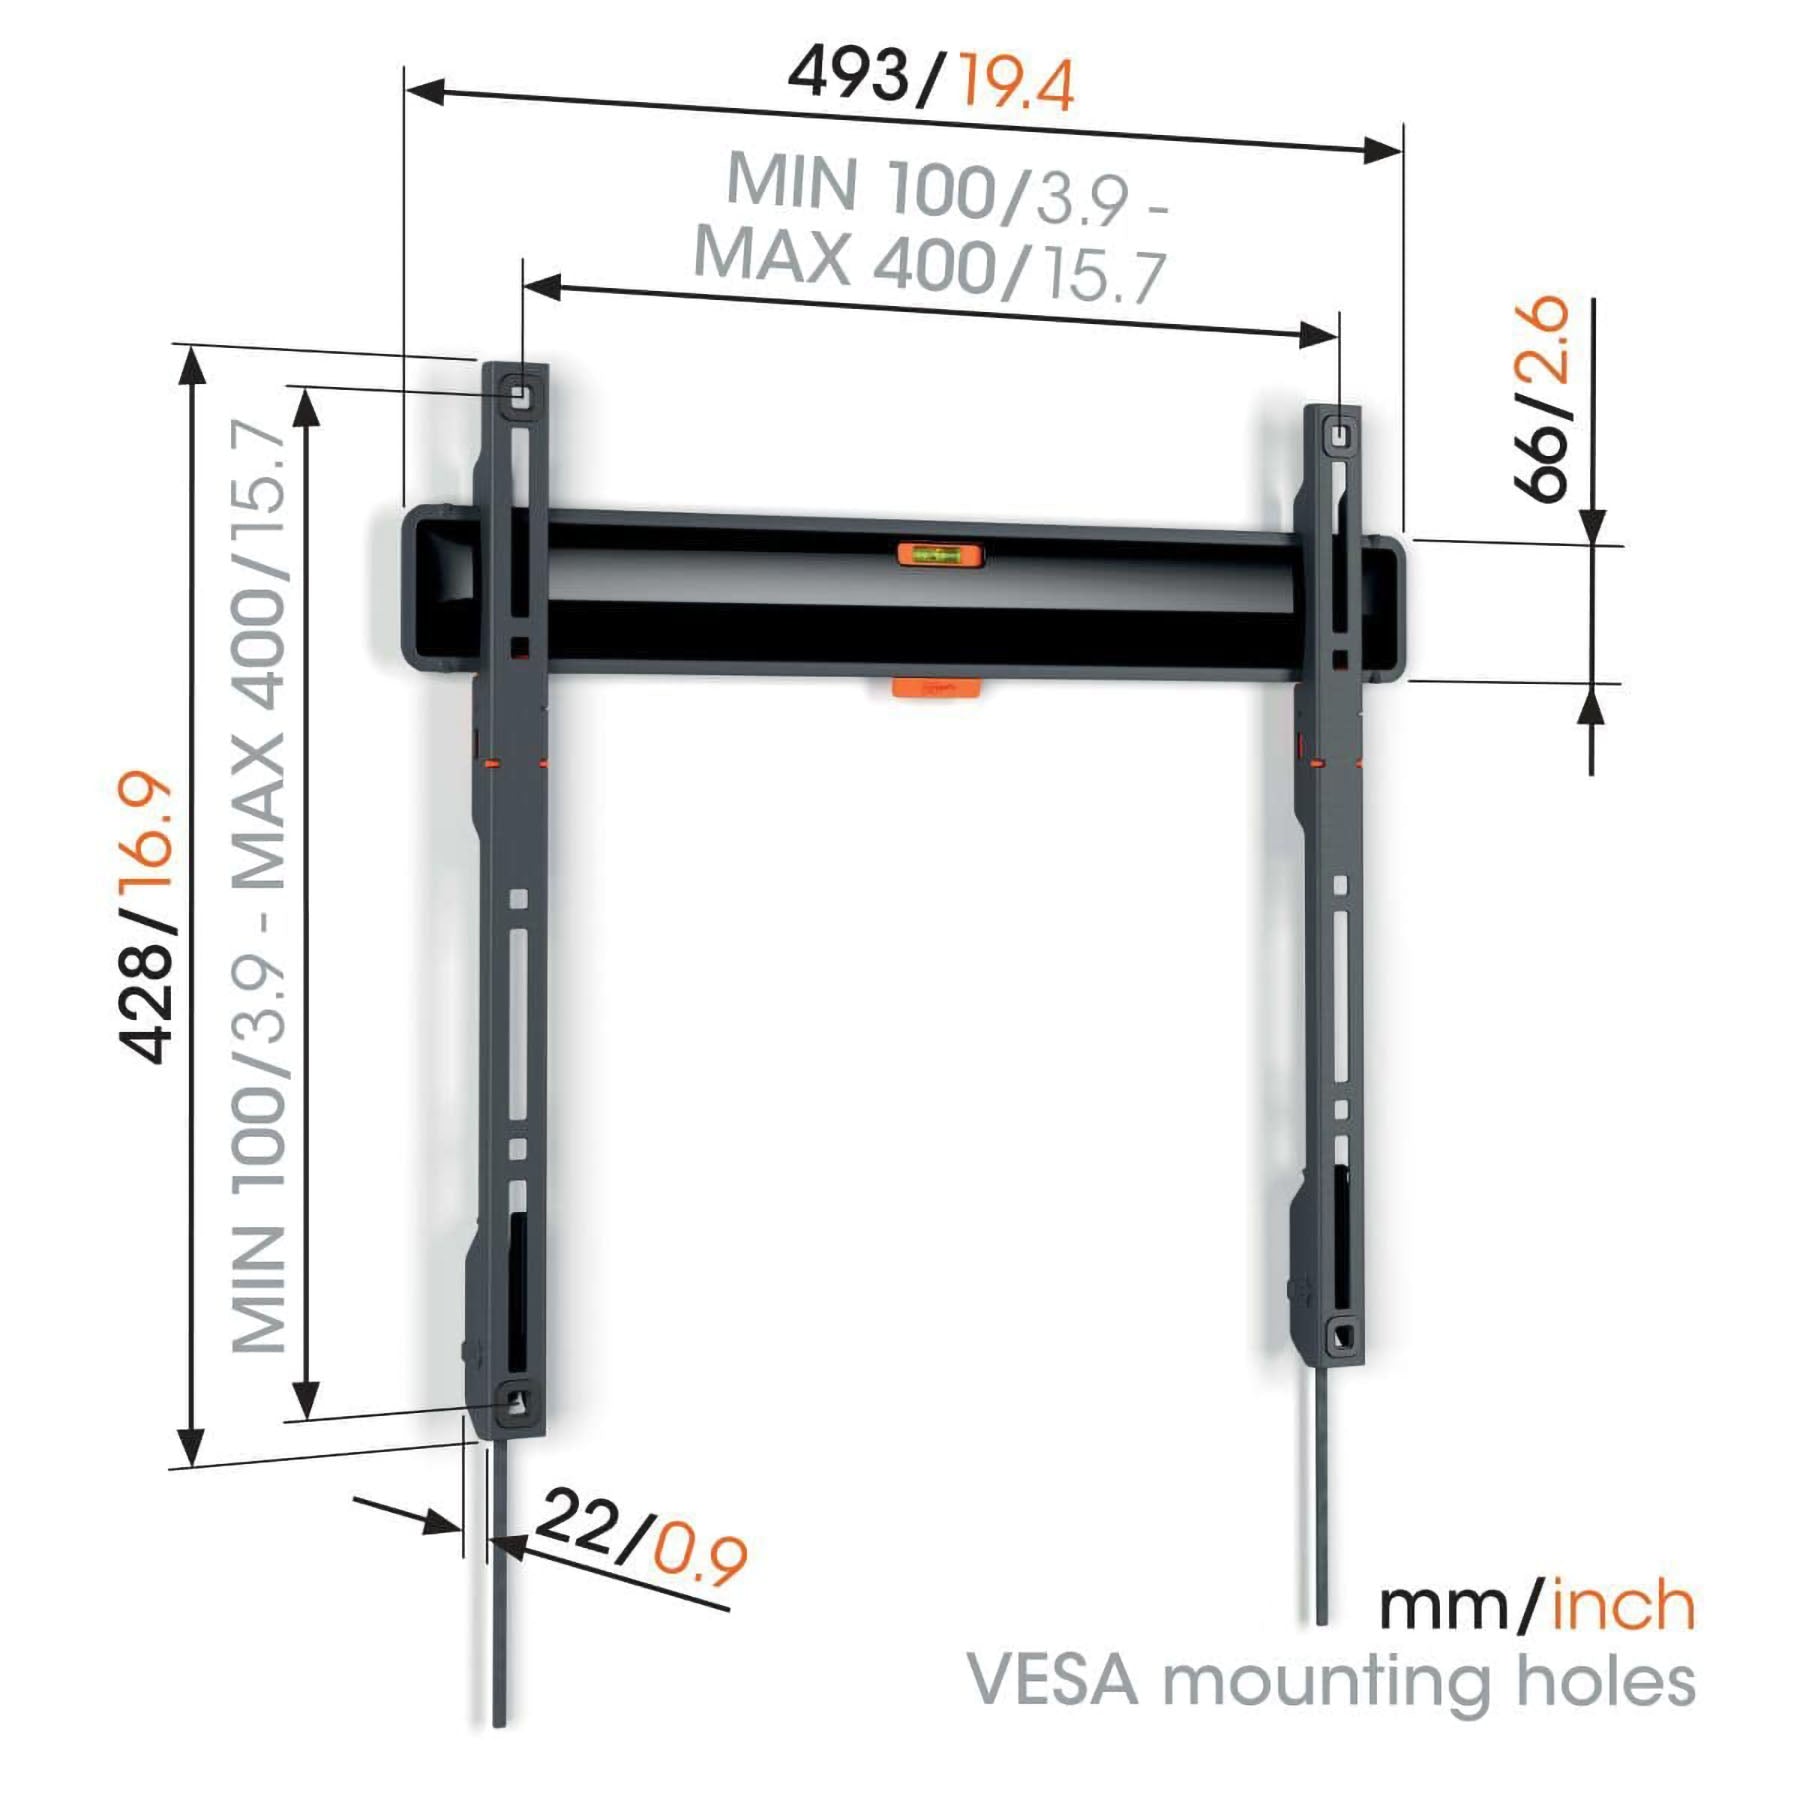 Vogel's TVM 3405 Fixed TV Wall Mount